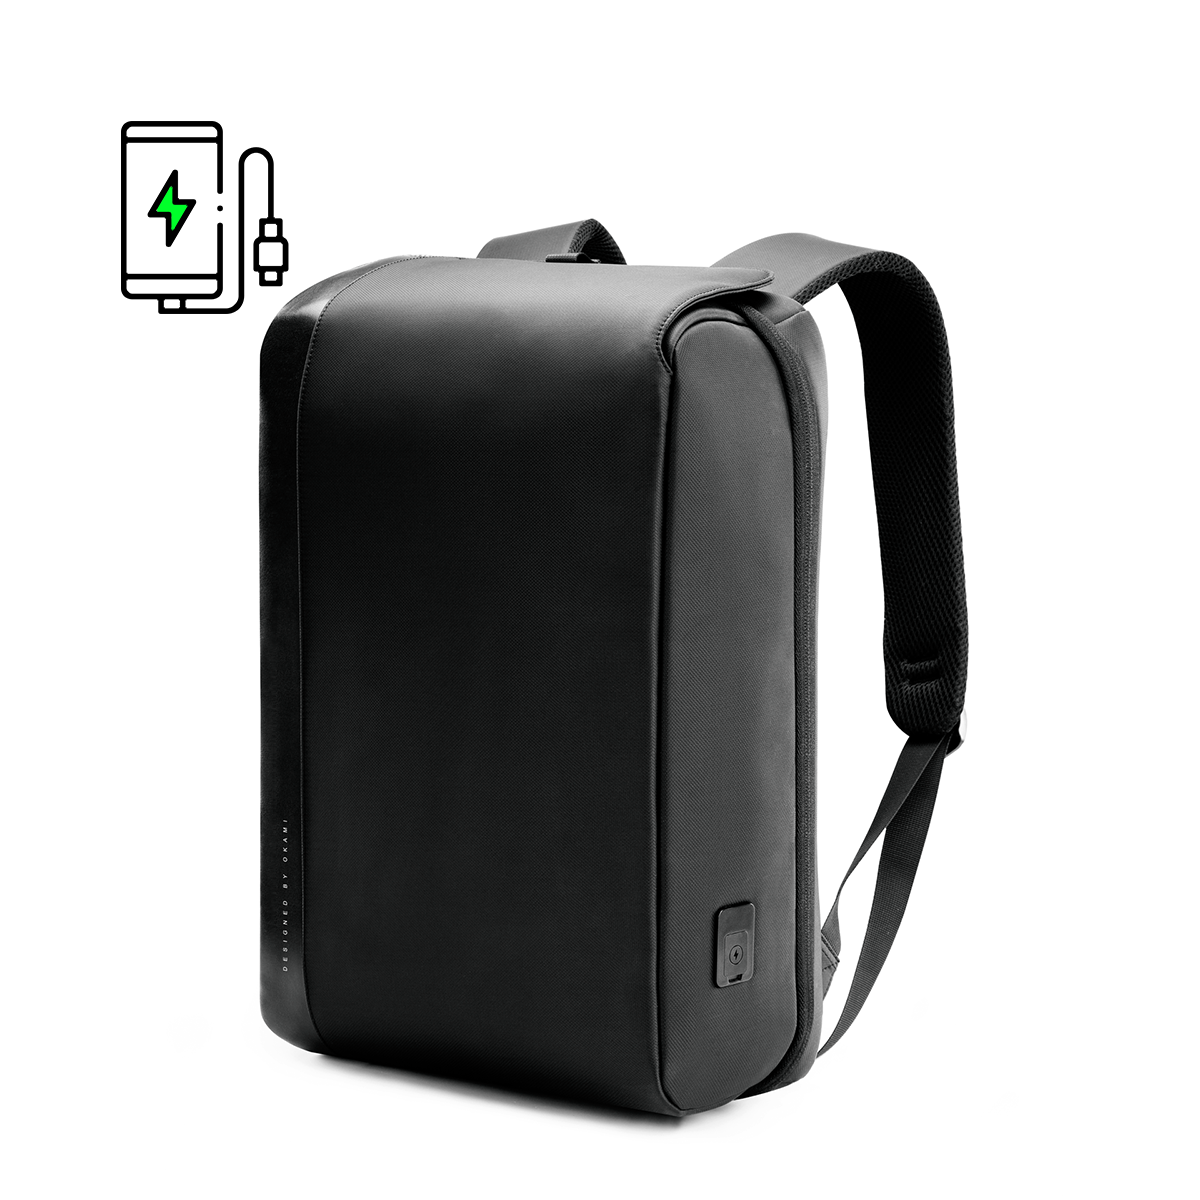 GoPack 'Switch' Hybrid Laptop Backpack with USB Fast-Charging